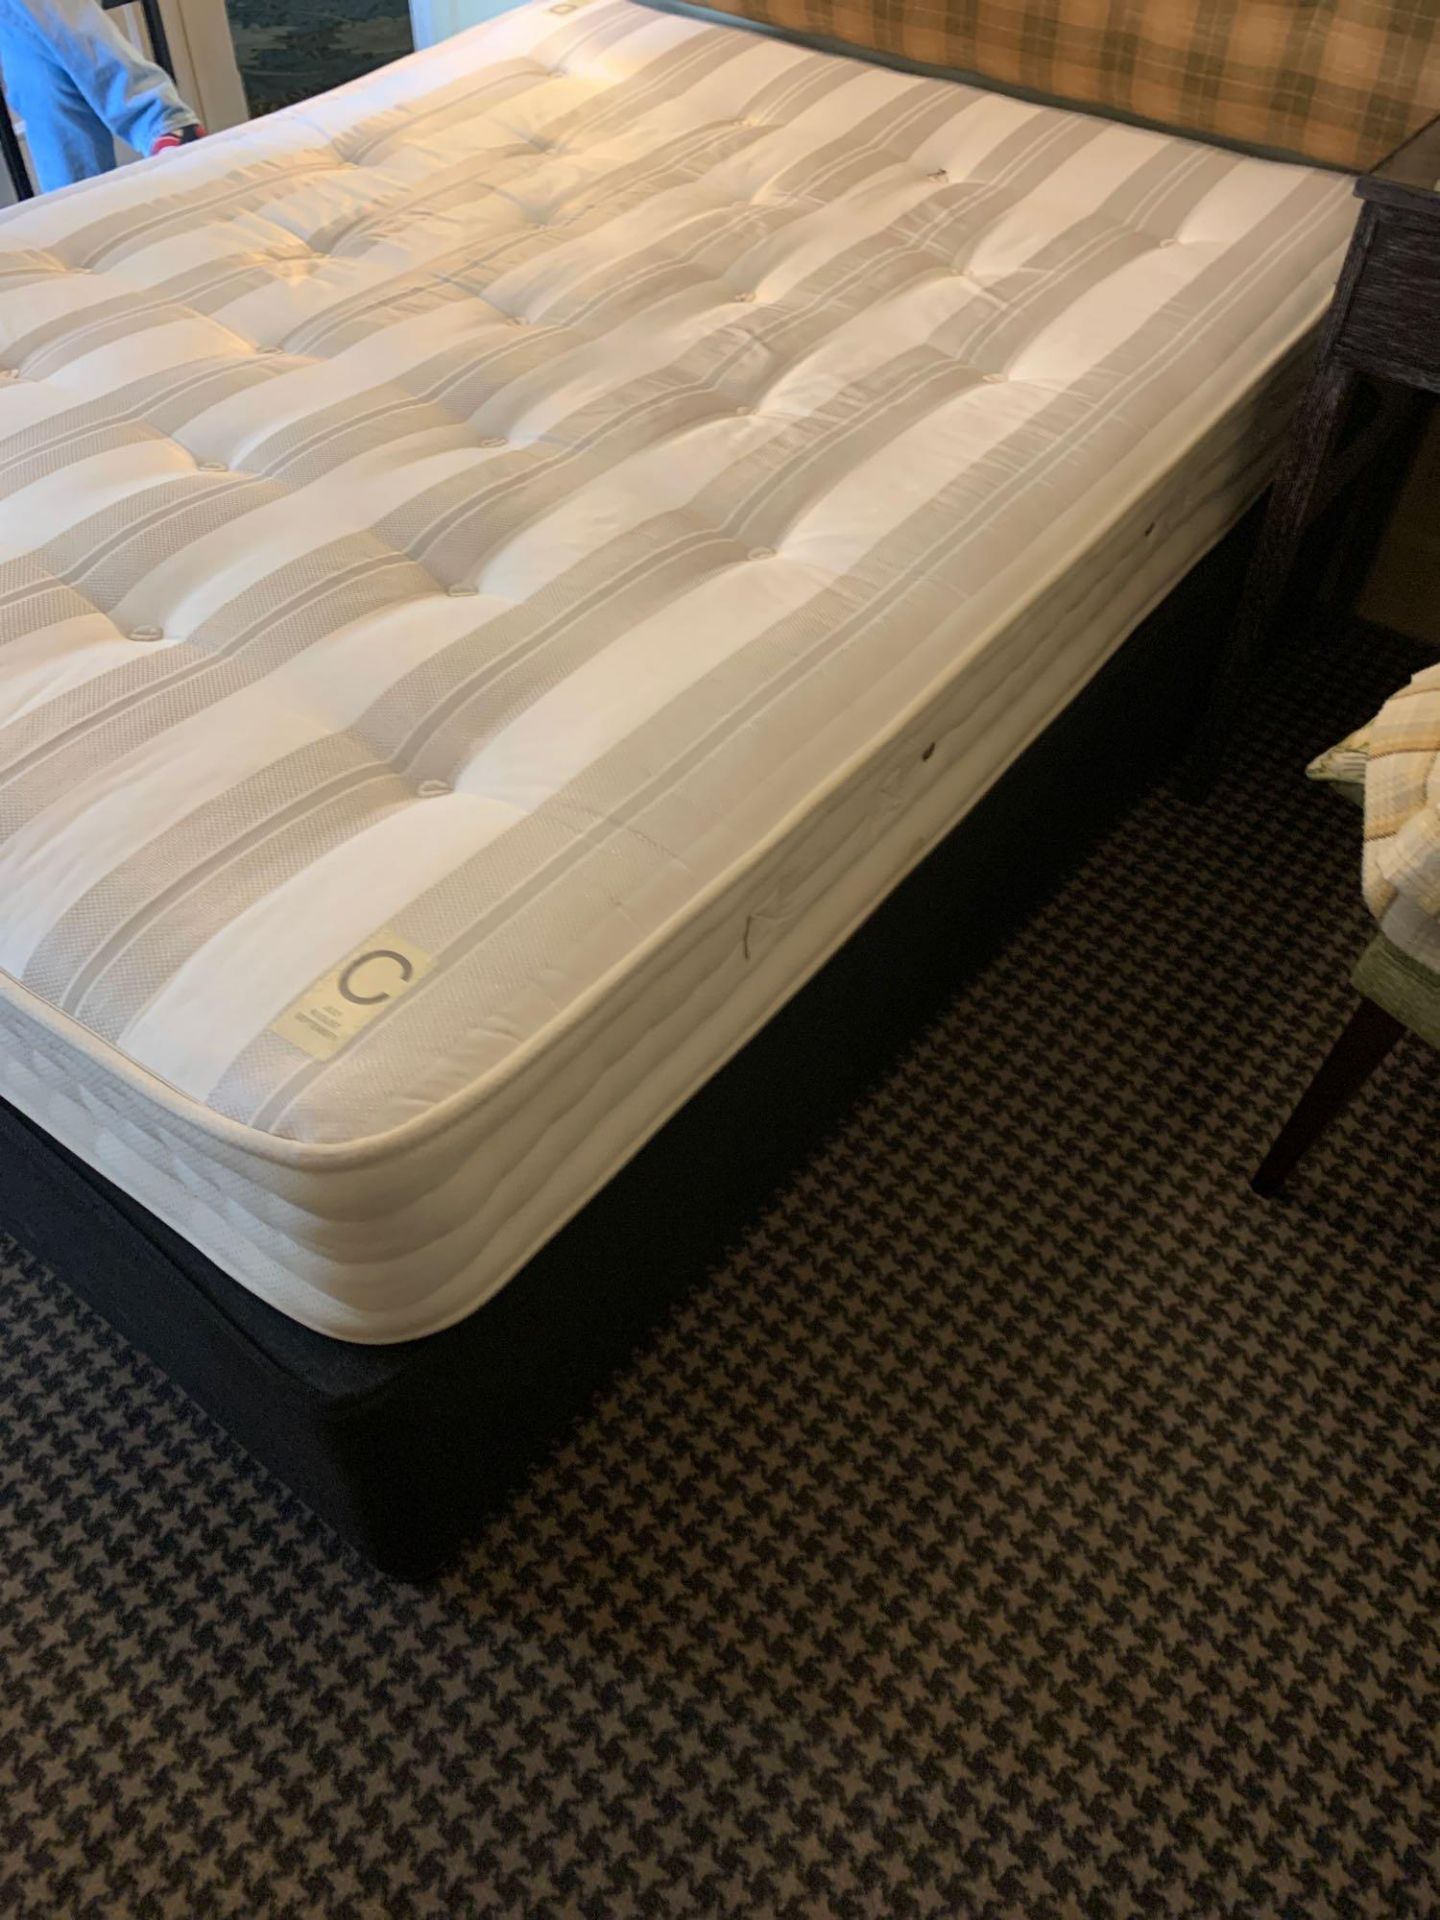 Hospitality Contract King Size Divan Bed Mattress And Headboard Sold With Cushions And Throw 200 x - Image 3 of 3